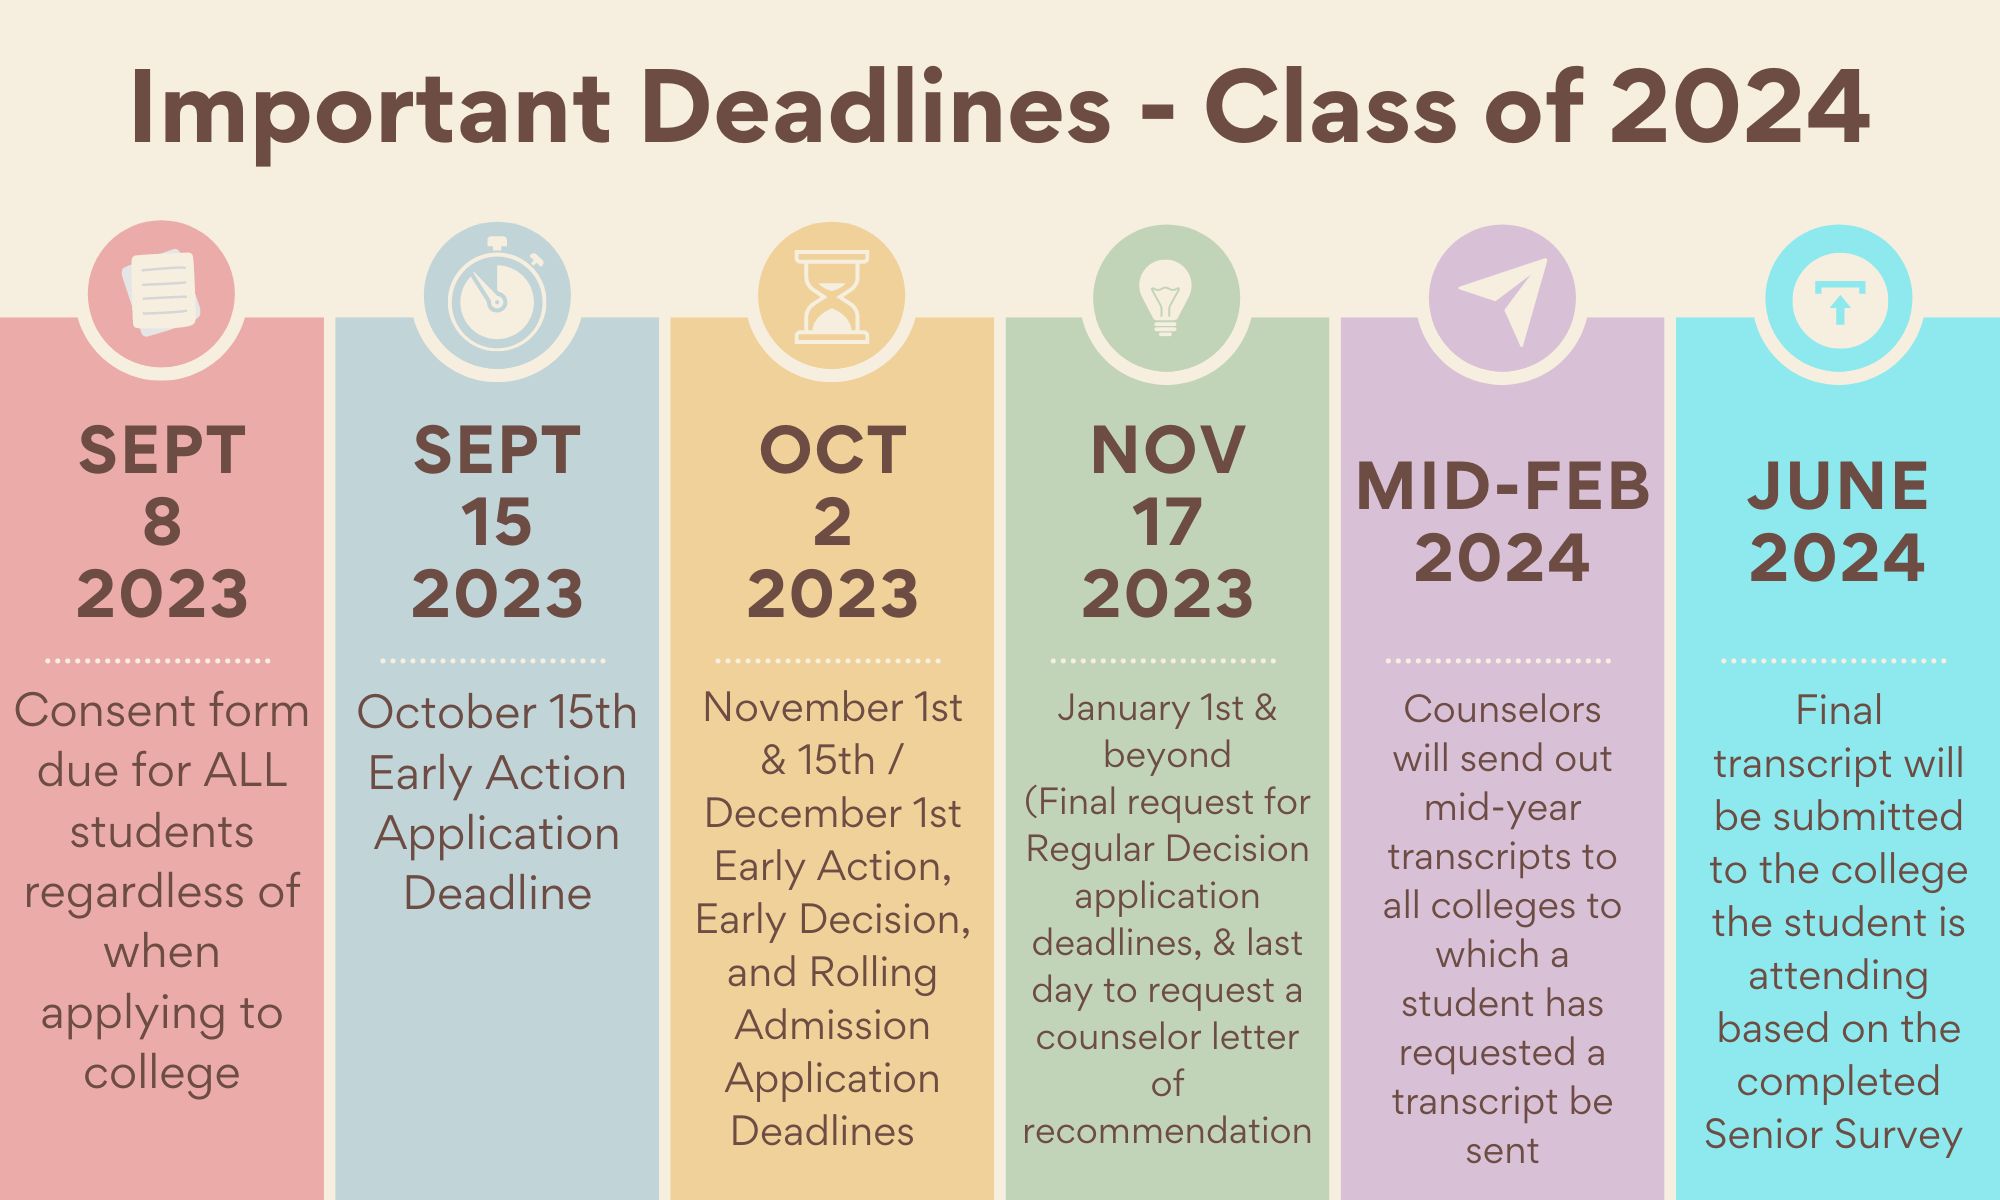 Important Deadlines - Class of 2024